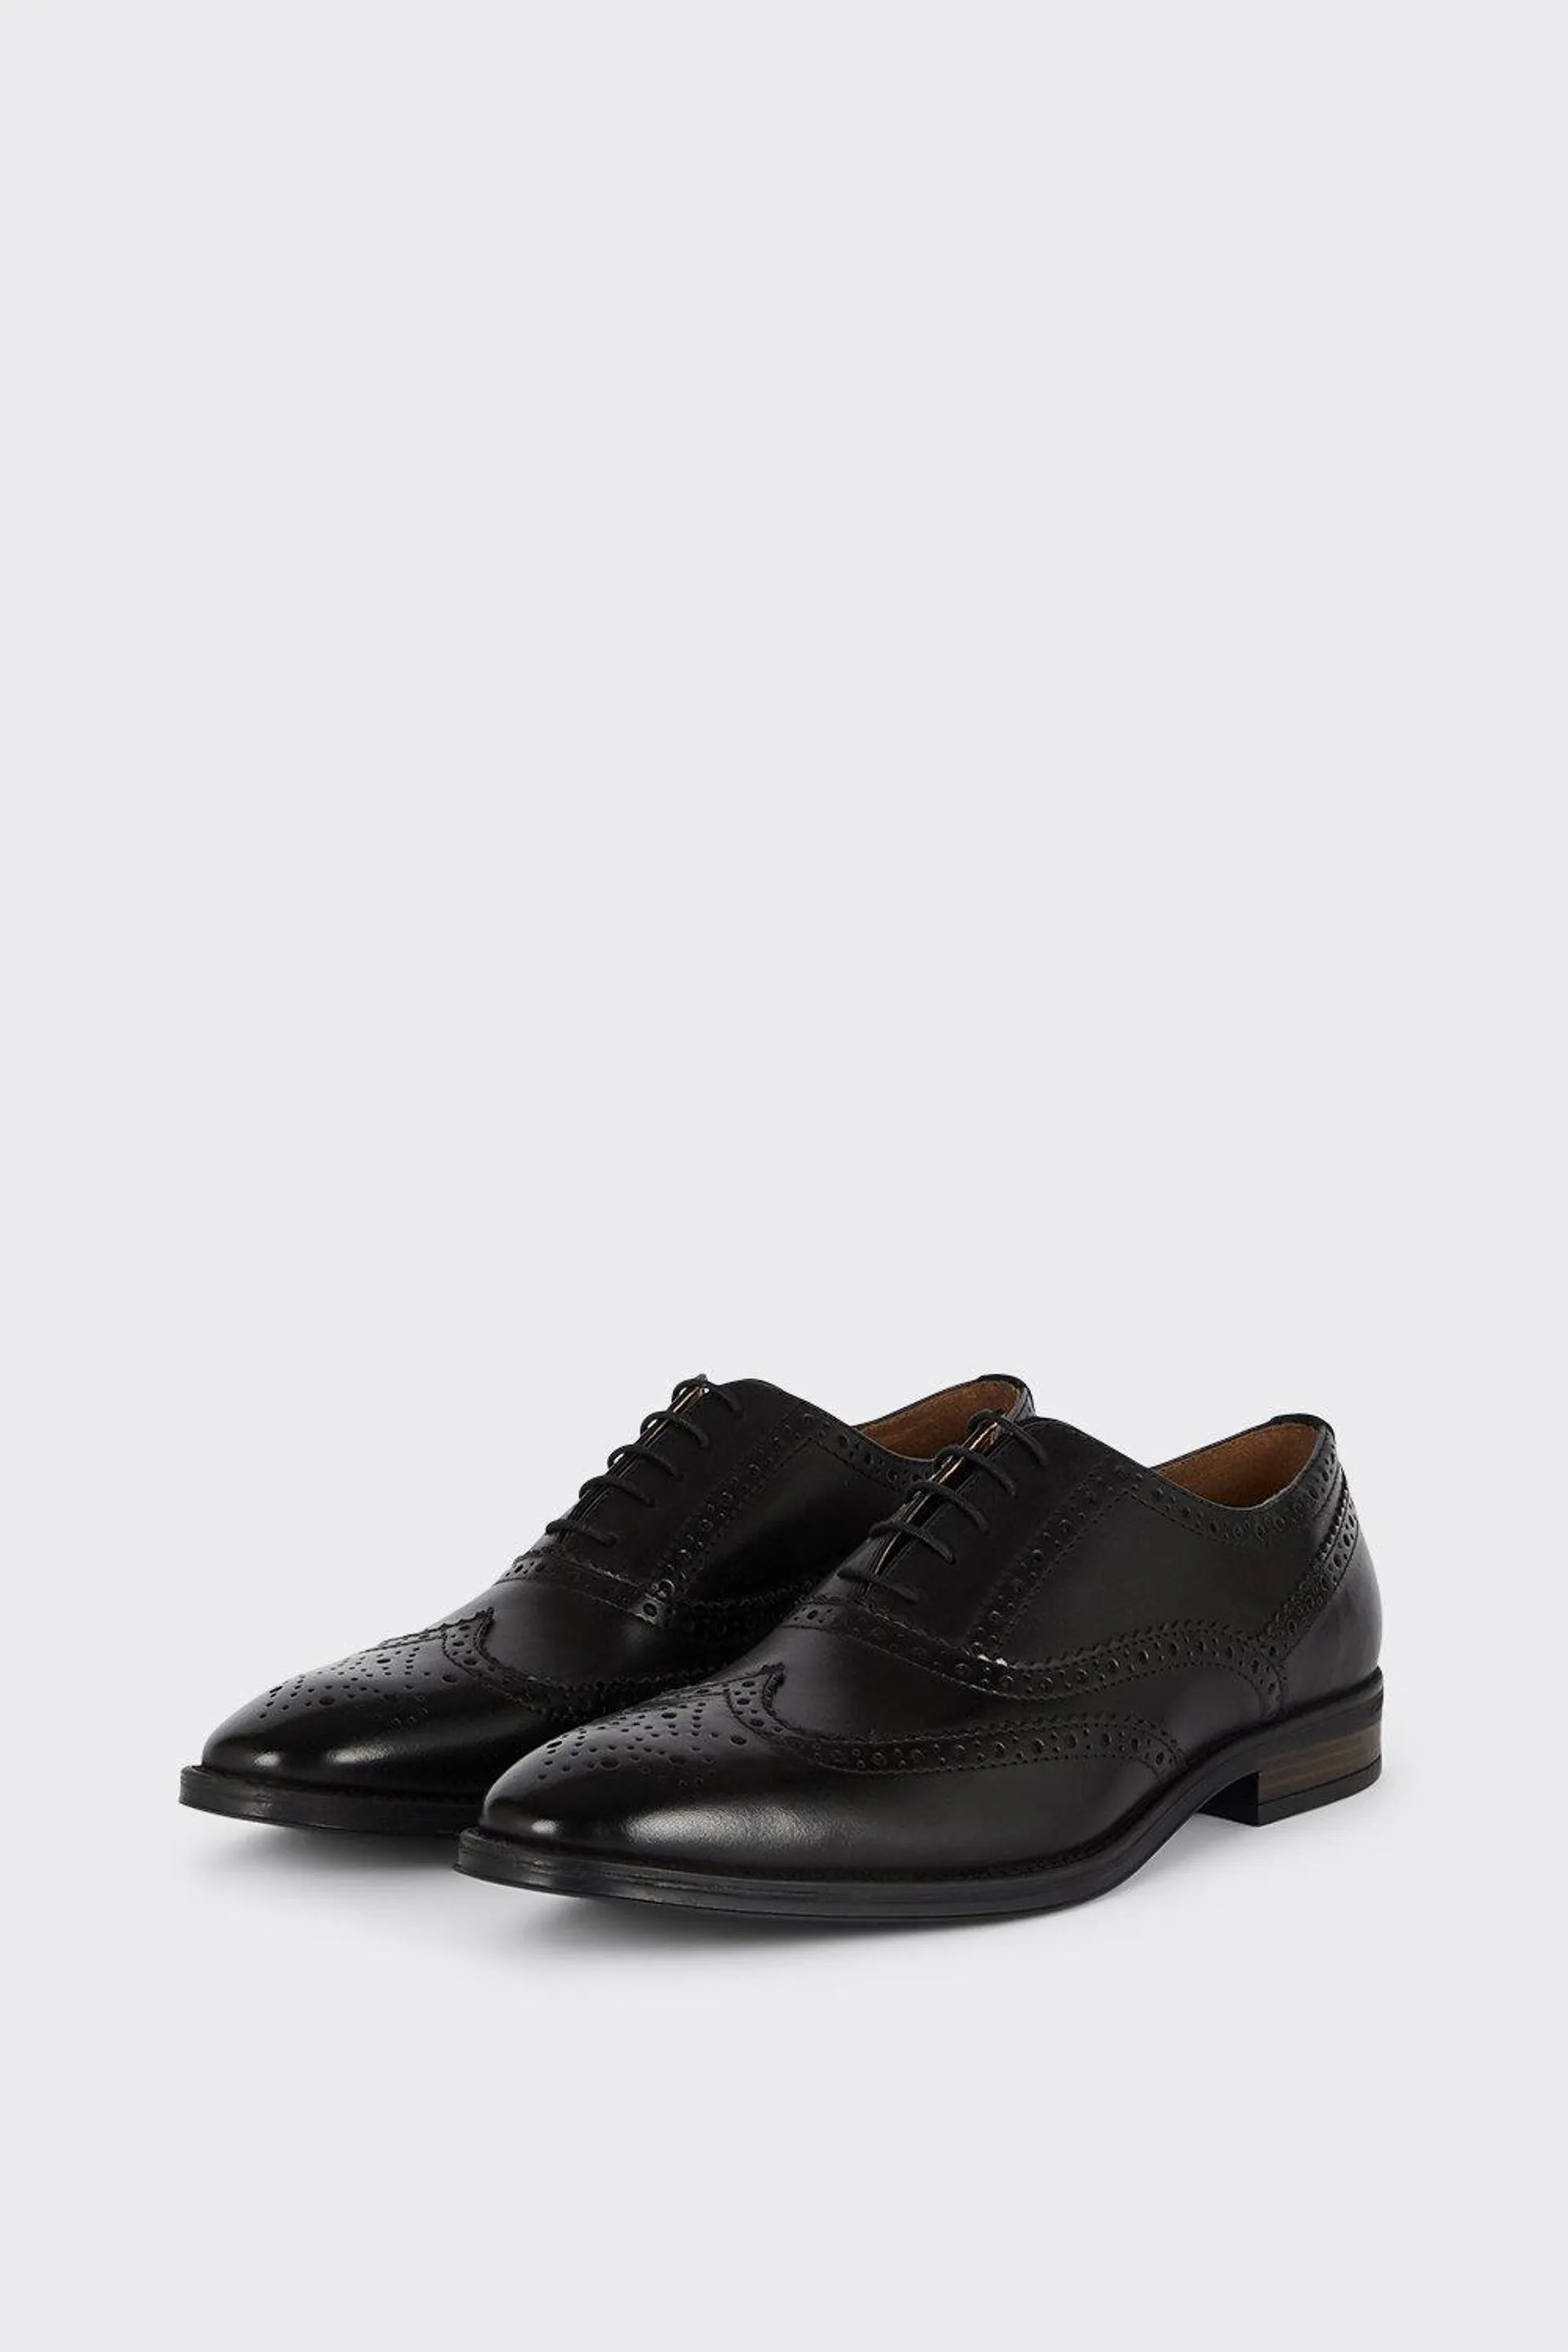 Leather Smart Black Oxford Brogue Shoes